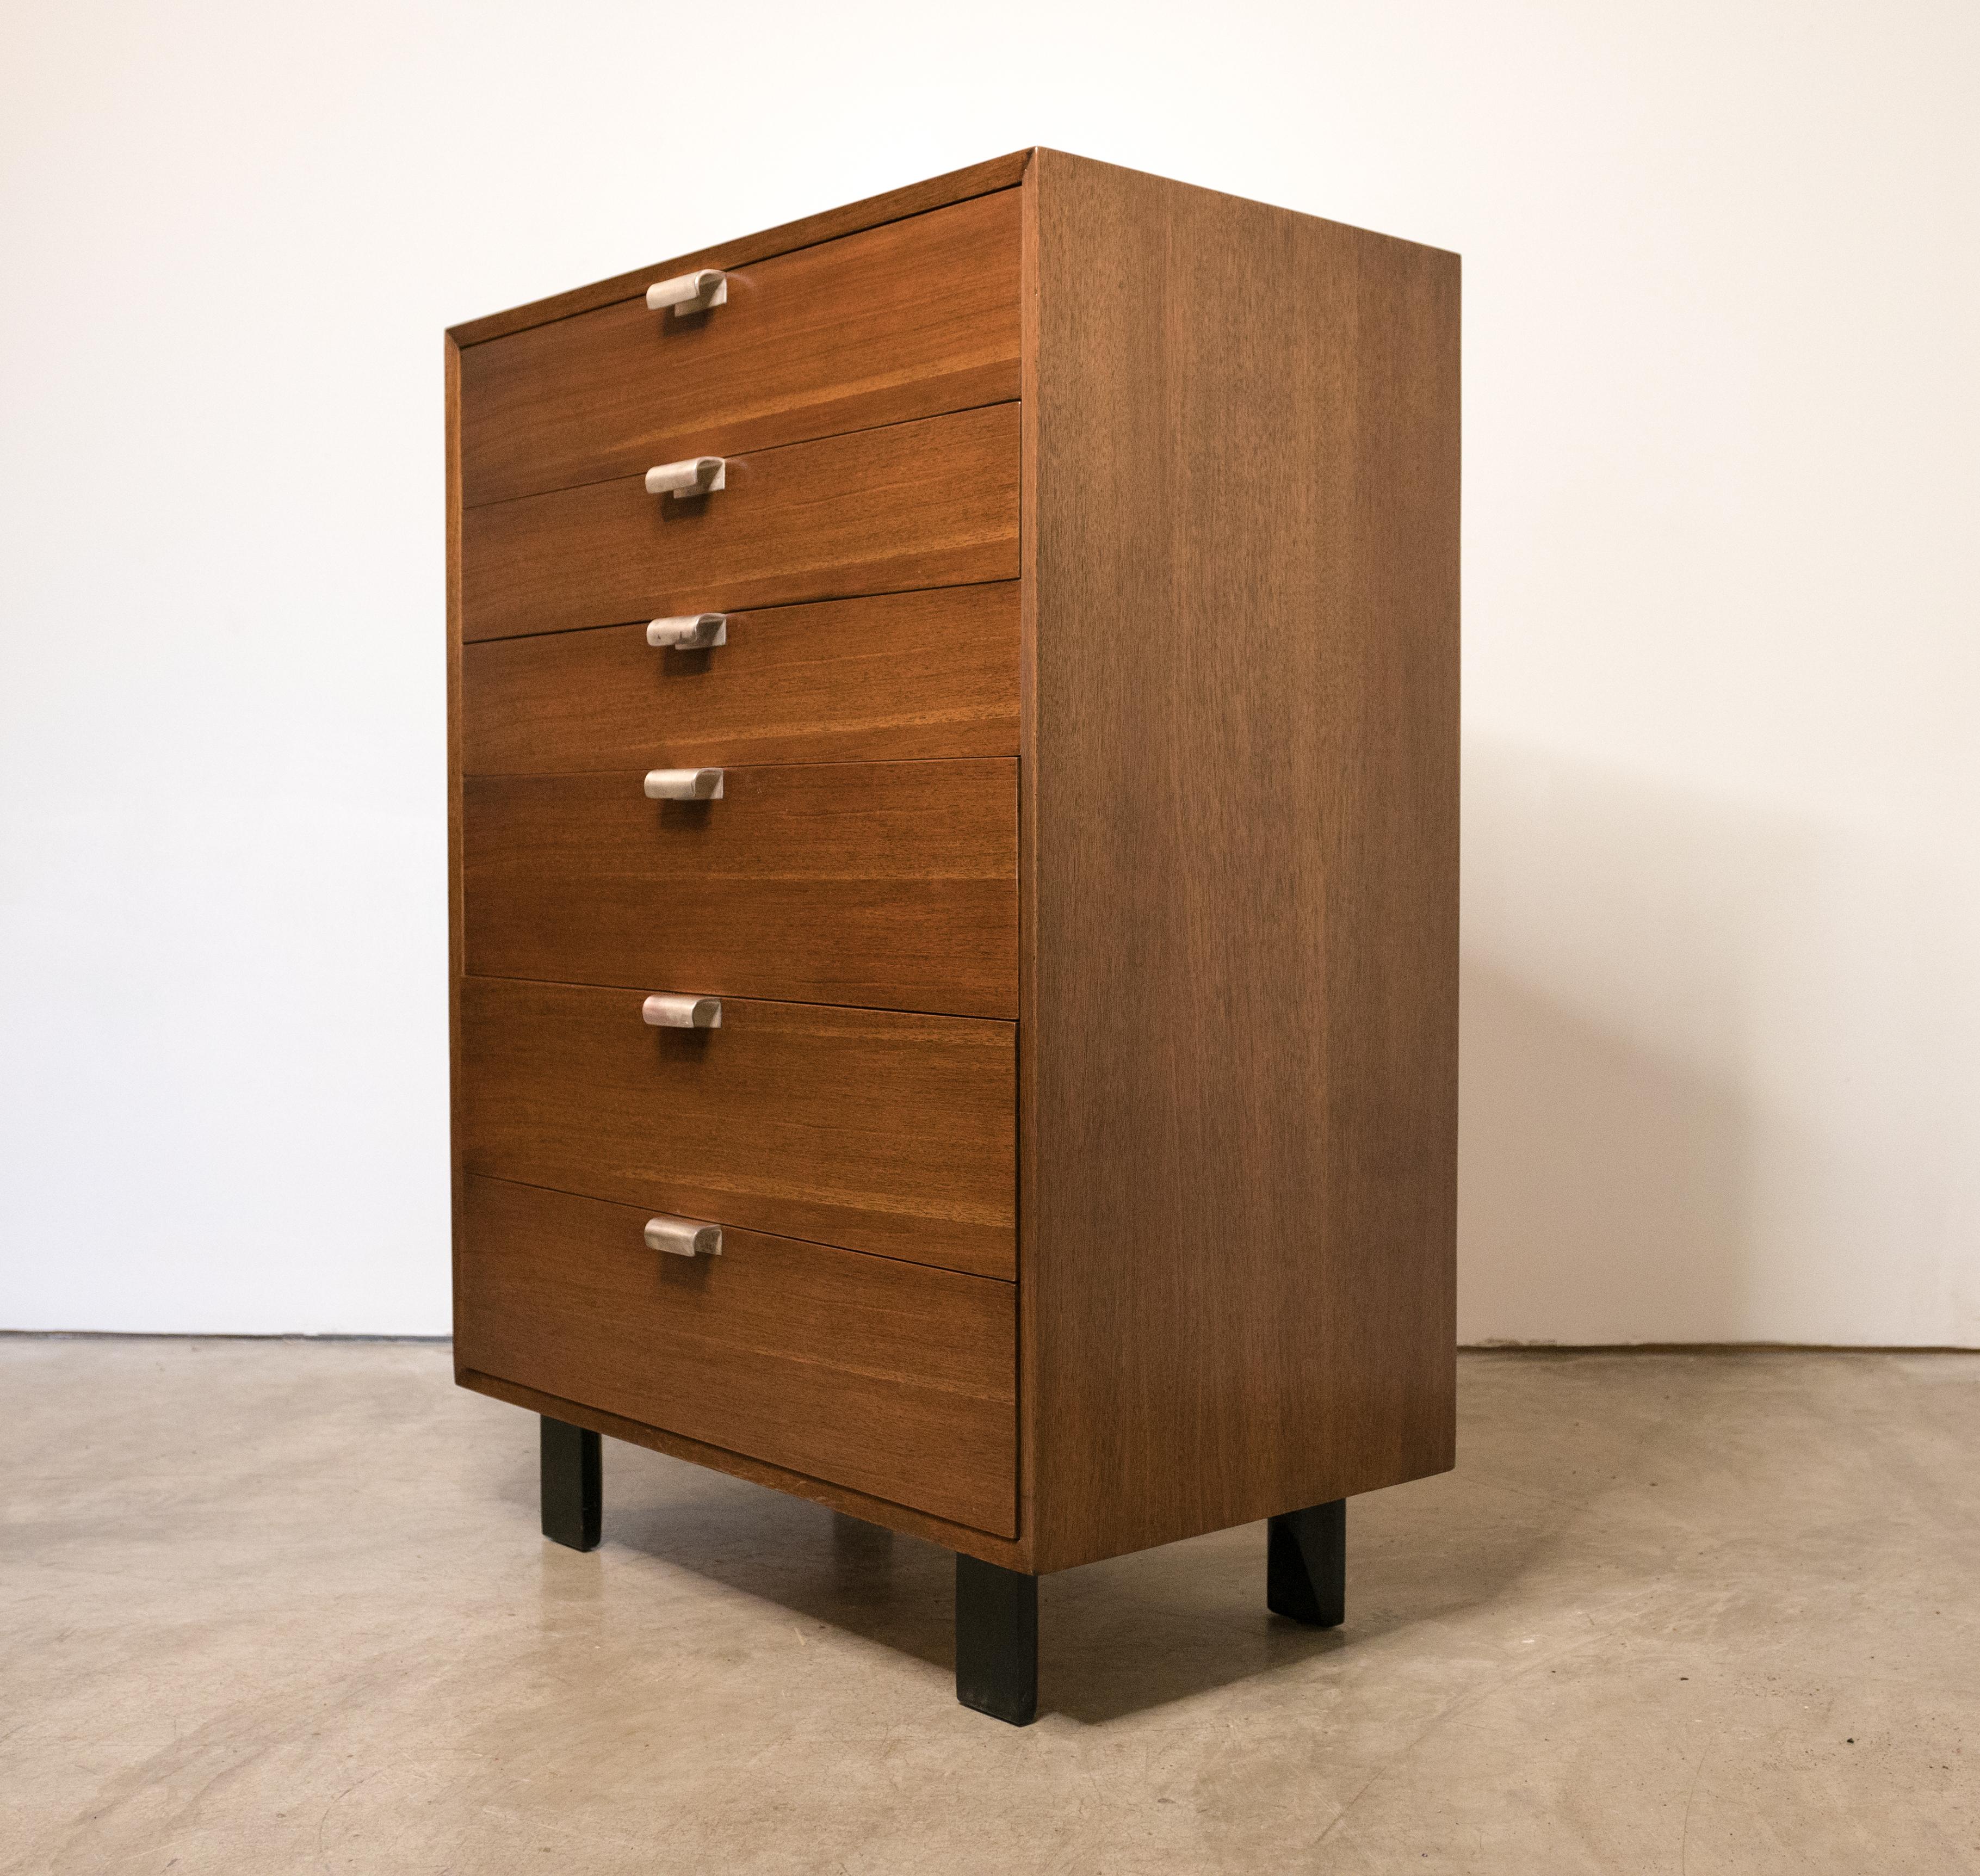 Midcentury George Nelson for Herman Miller tallboy dresser with six drawers, part of the basic storage components that George Nelson designed for Herman Miller in 1952. Topmost drawer partitioned into six sections. Also available: matching side